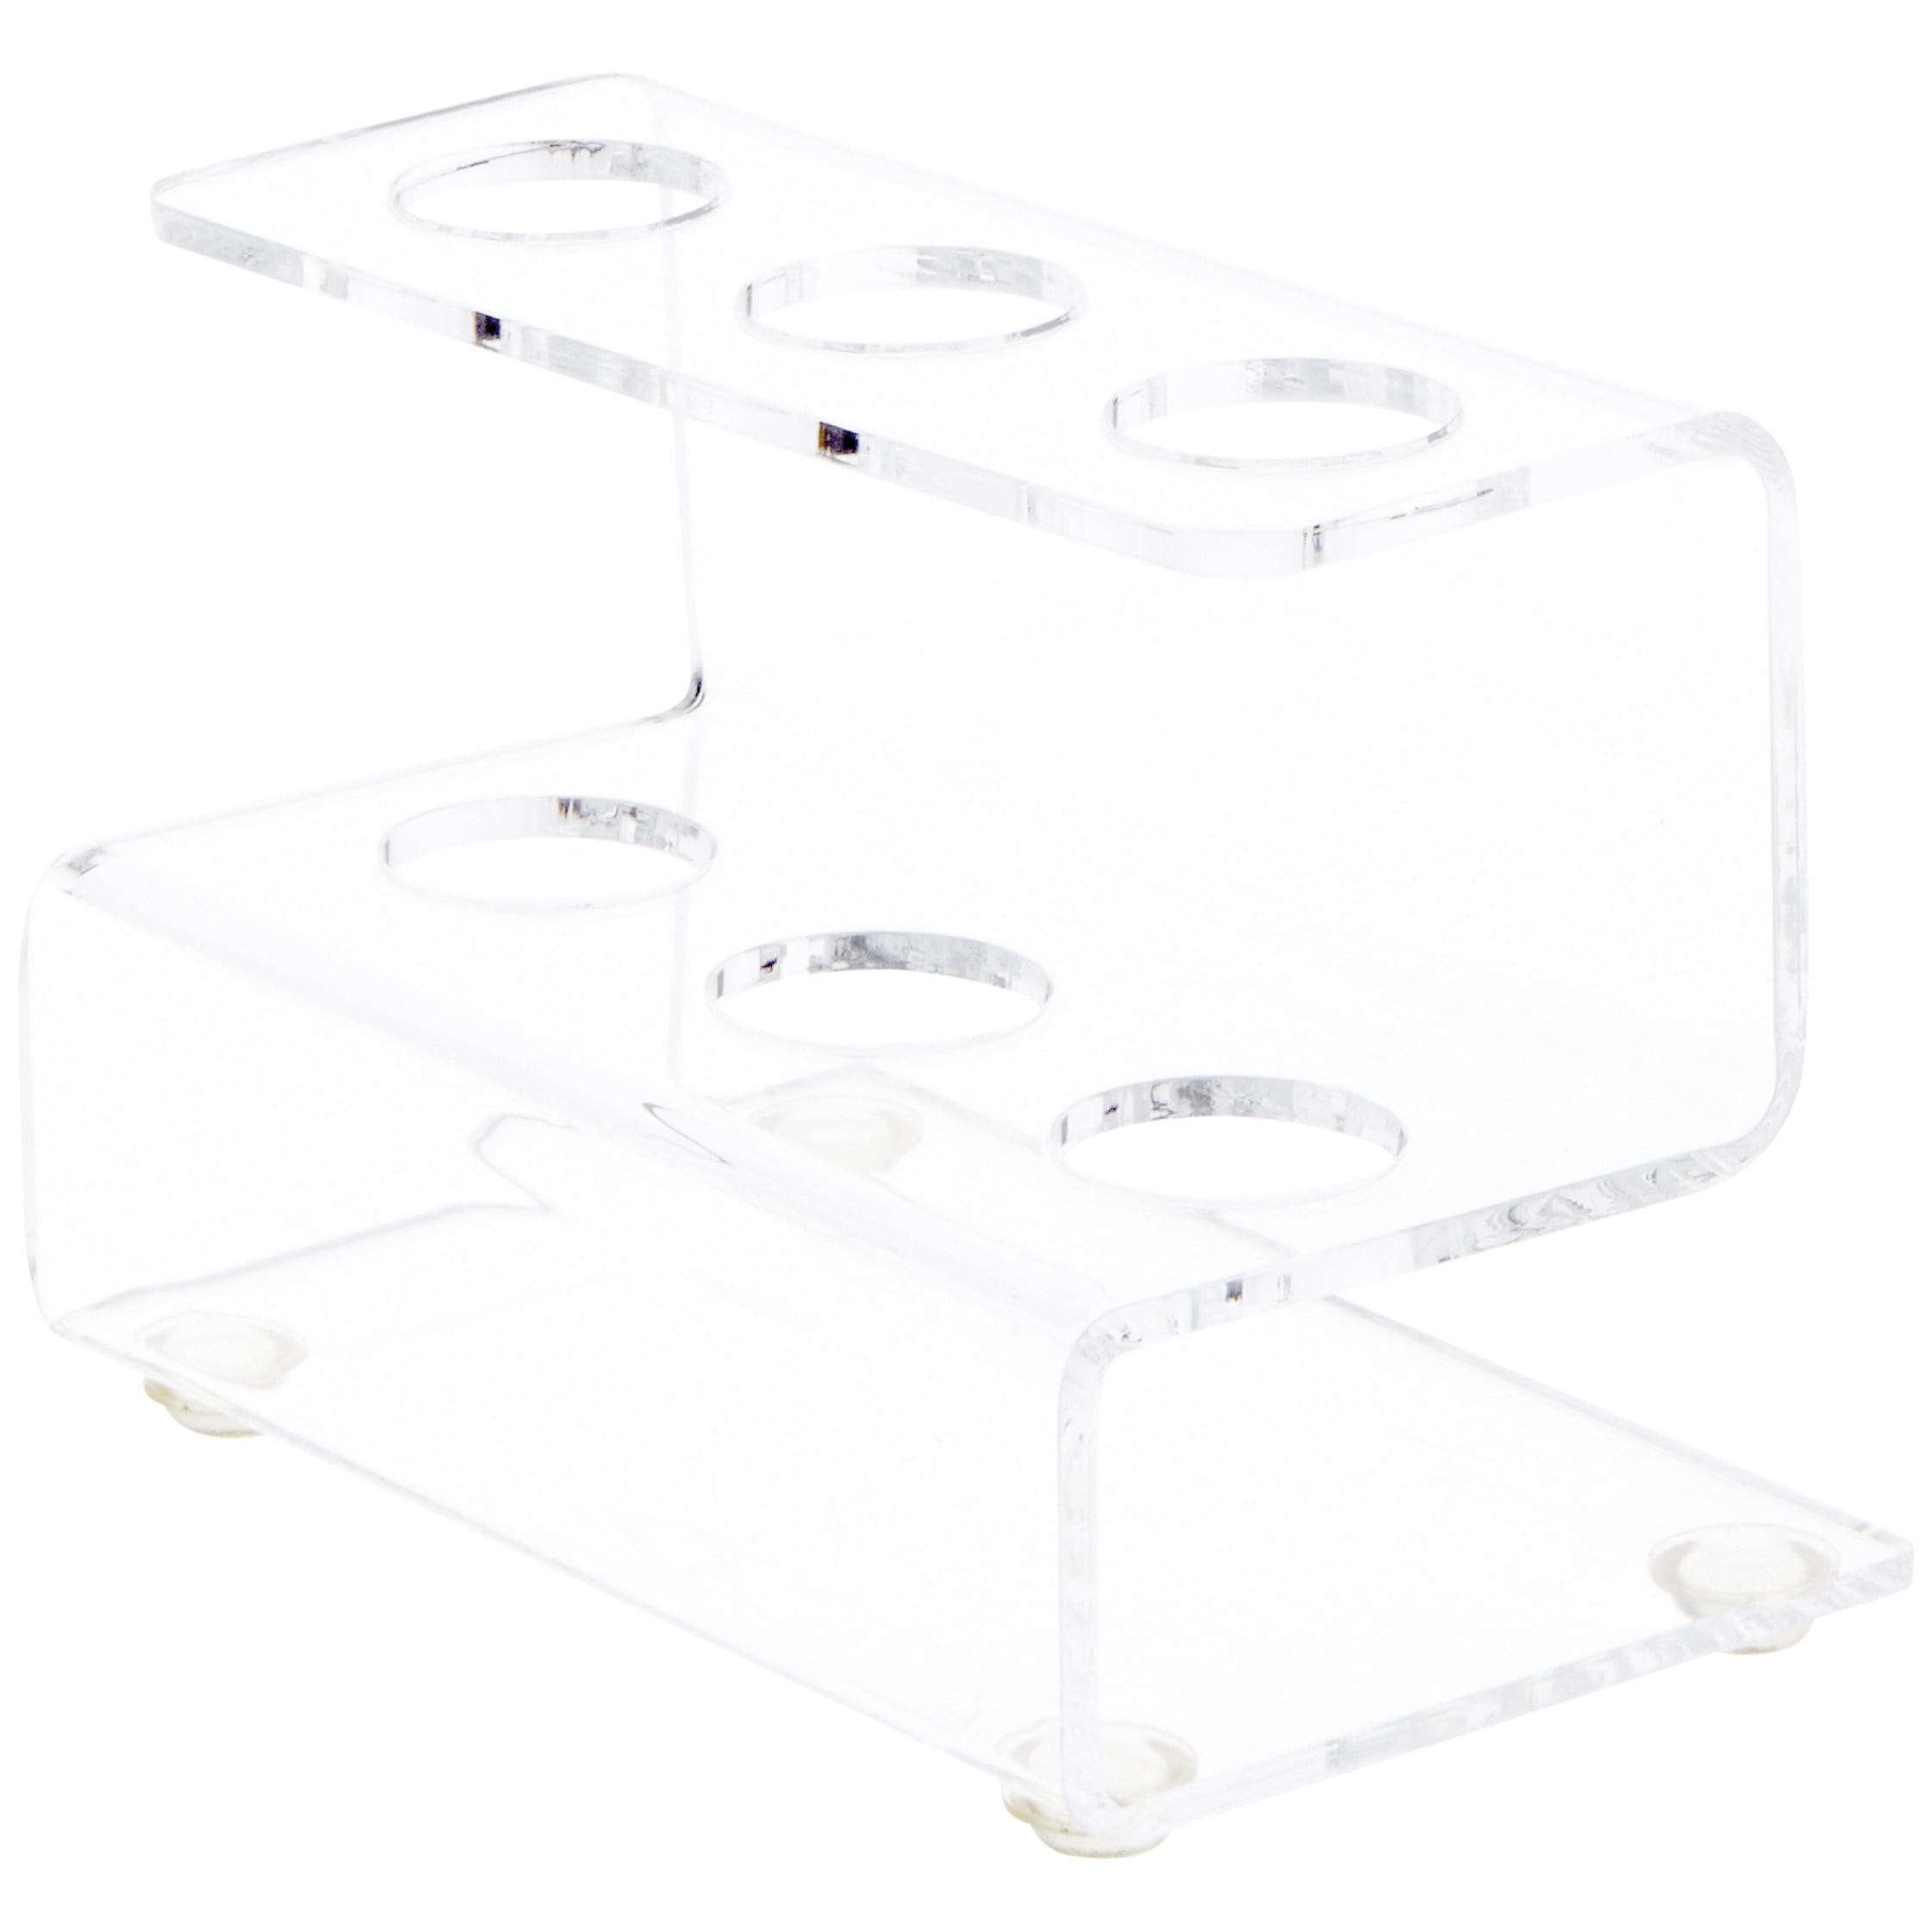 Details about   Acrylic Clear Stand Model Removable Display Shelf Transparent Perspex Show Rack 